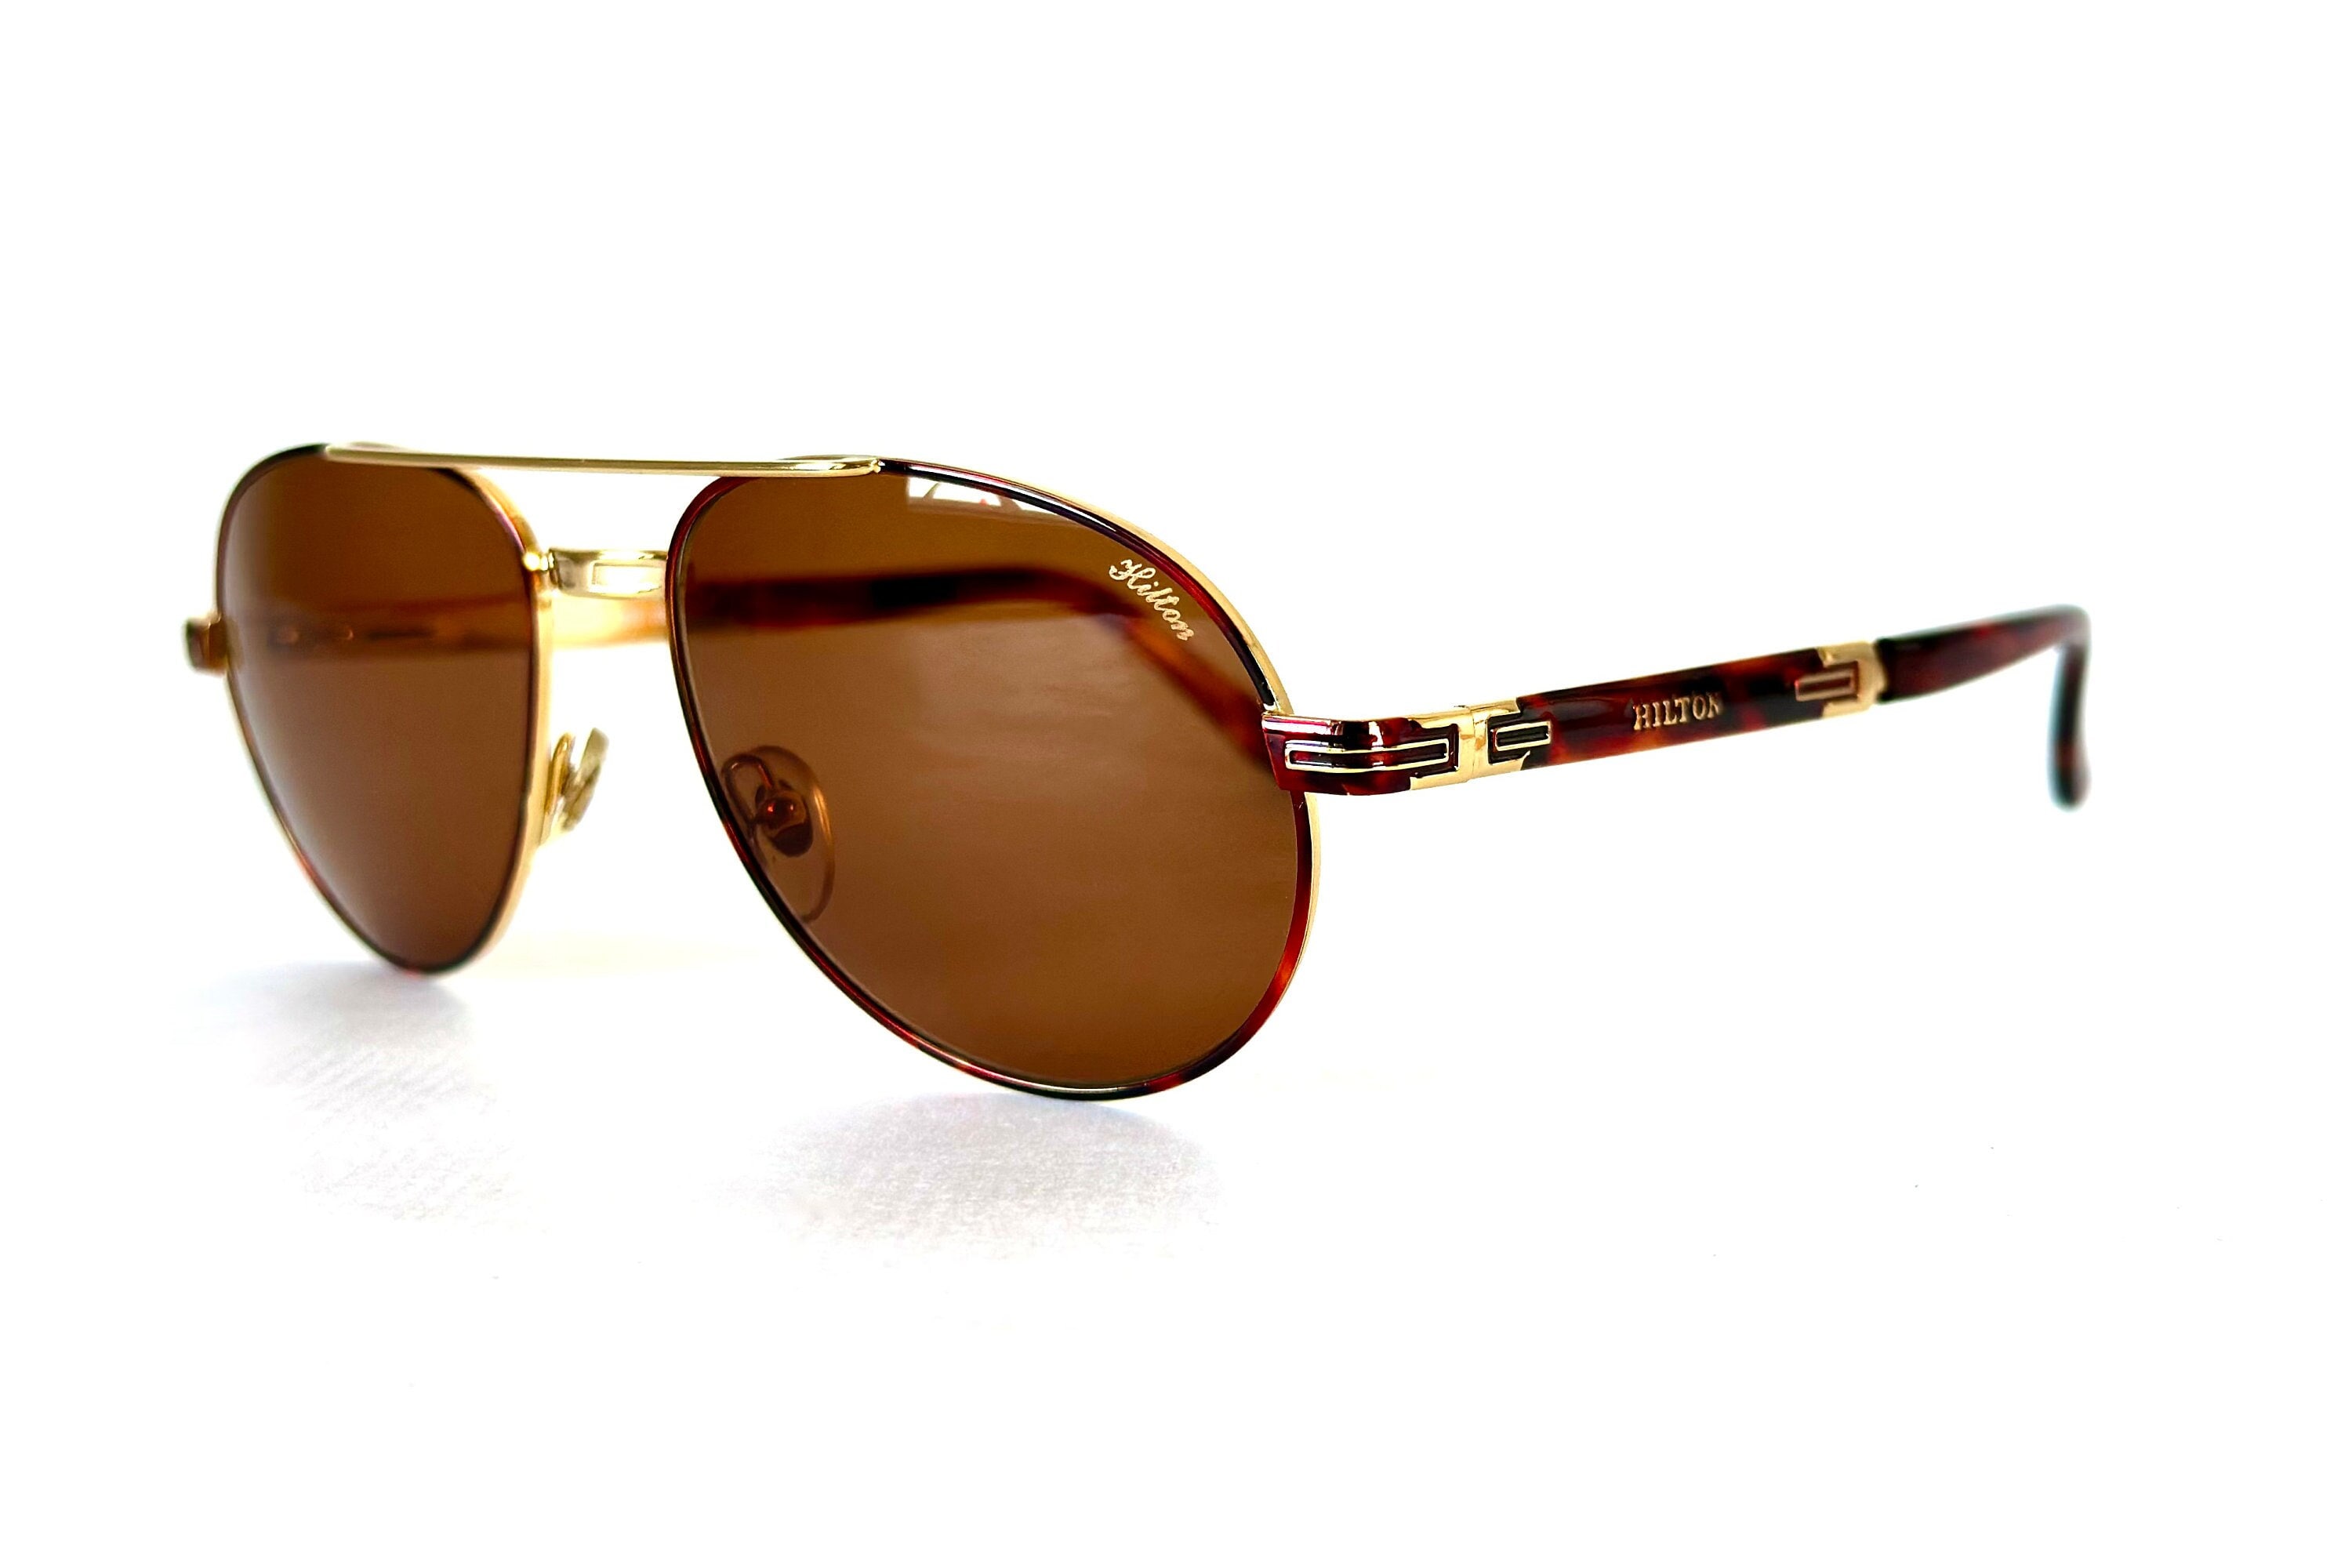 Hilton Exclusive 02 Aviator Certified Vintage Sunglasses : Kings of Past